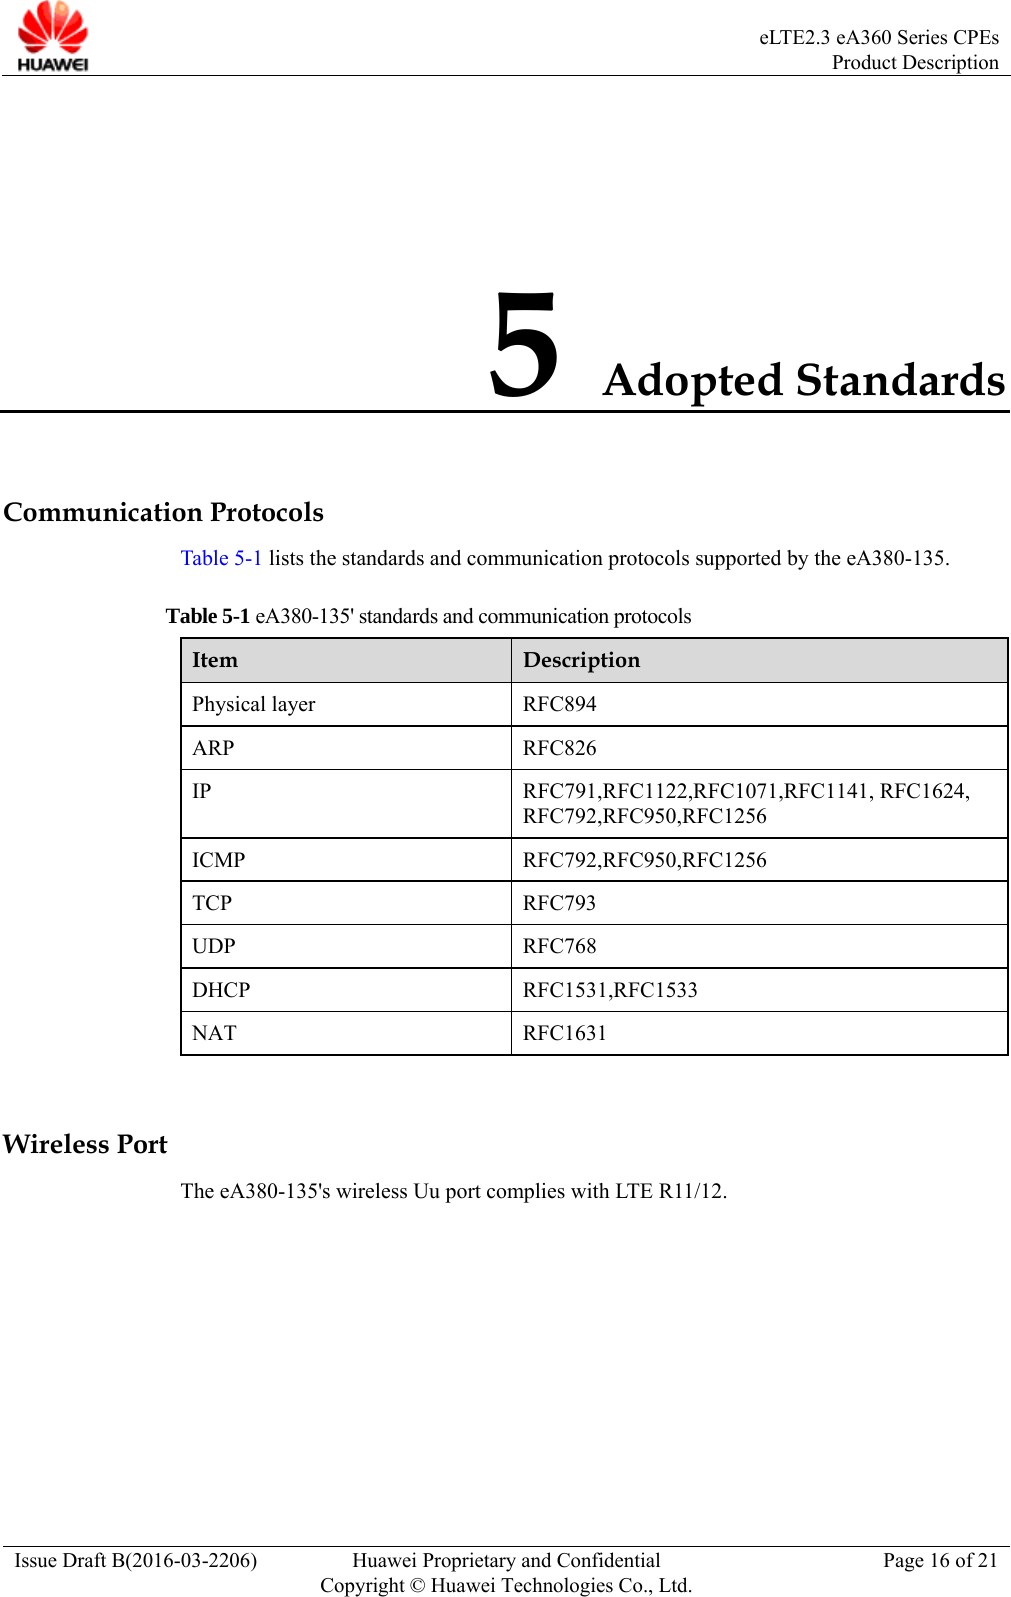  eLTE2.3 eA360 Series CPEsProduct Description Issue Draft B(2016-03-2206)  Huawei Proprietary and Confidential Copyright © Huawei Technologies Co., Ltd.Page 16 of 21 5 Adopted Standards Communication Protocols Table 5-1 lists the standards and communication protocols supported by the eA380-135.   Table 5-1 eA380-135&apos; standards and communication protocols Item  Description Physical layer  RFC894 ARP RFC826 IP RFC791,RFC1122,RFC1071,RFC1141, RFC1624, RFC792,RFC950,RFC1256 ICMP RFC792,RFC950,RFC1256 TCP RFC793 UDP RFC768 DHCP RFC1531,RFC1533 NAT RFC1631  Wireless Port The eA380-135&apos;s wireless Uu port complies with LTE R11/12. 